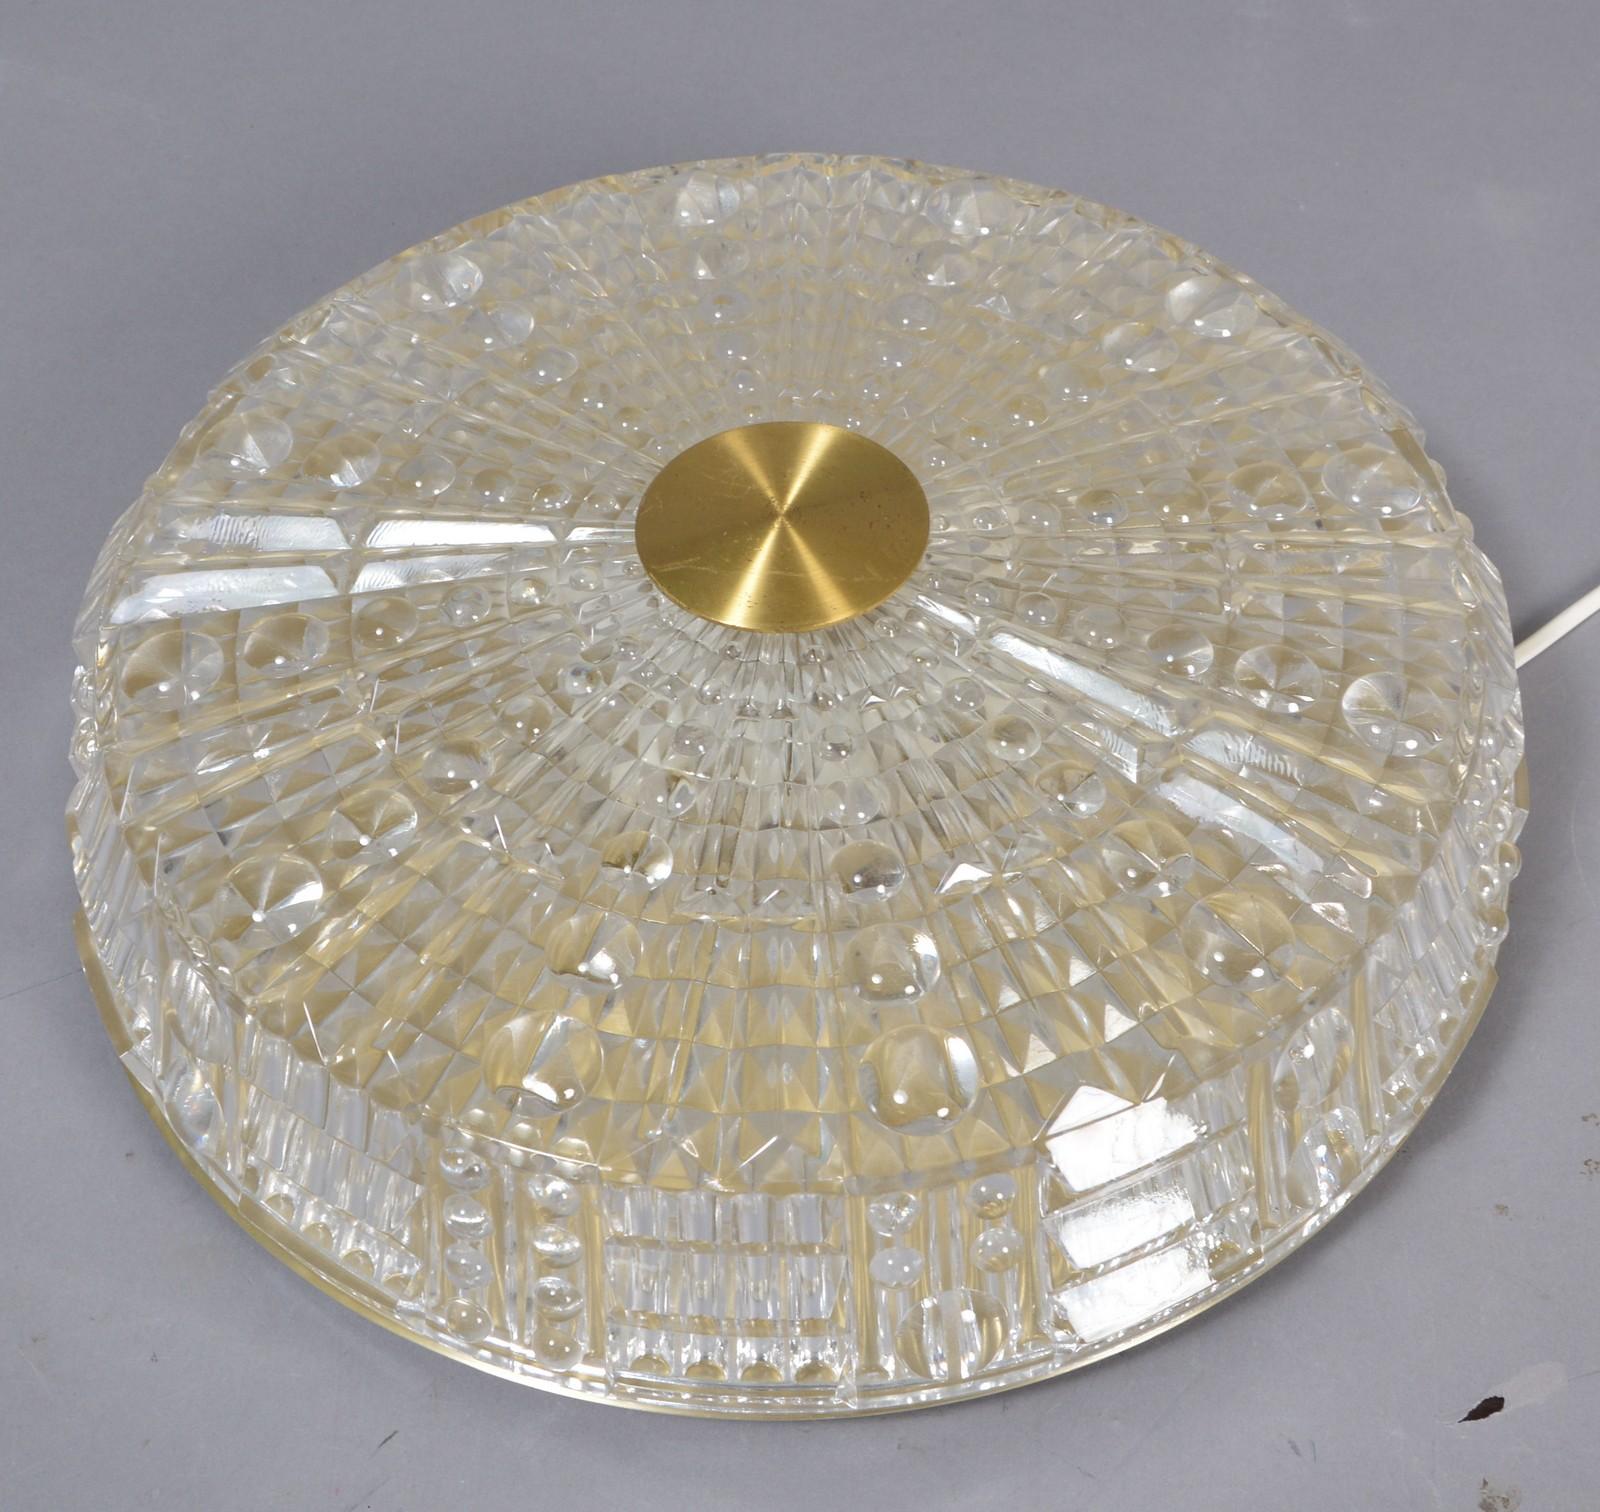 Flushmount ceiling fixture for Lyfa by Orrefors of Sweden, designed by Carl Fagerlund made of textured glass with brass mounting. 6 candelabra style sockets. Several available in this style.

 